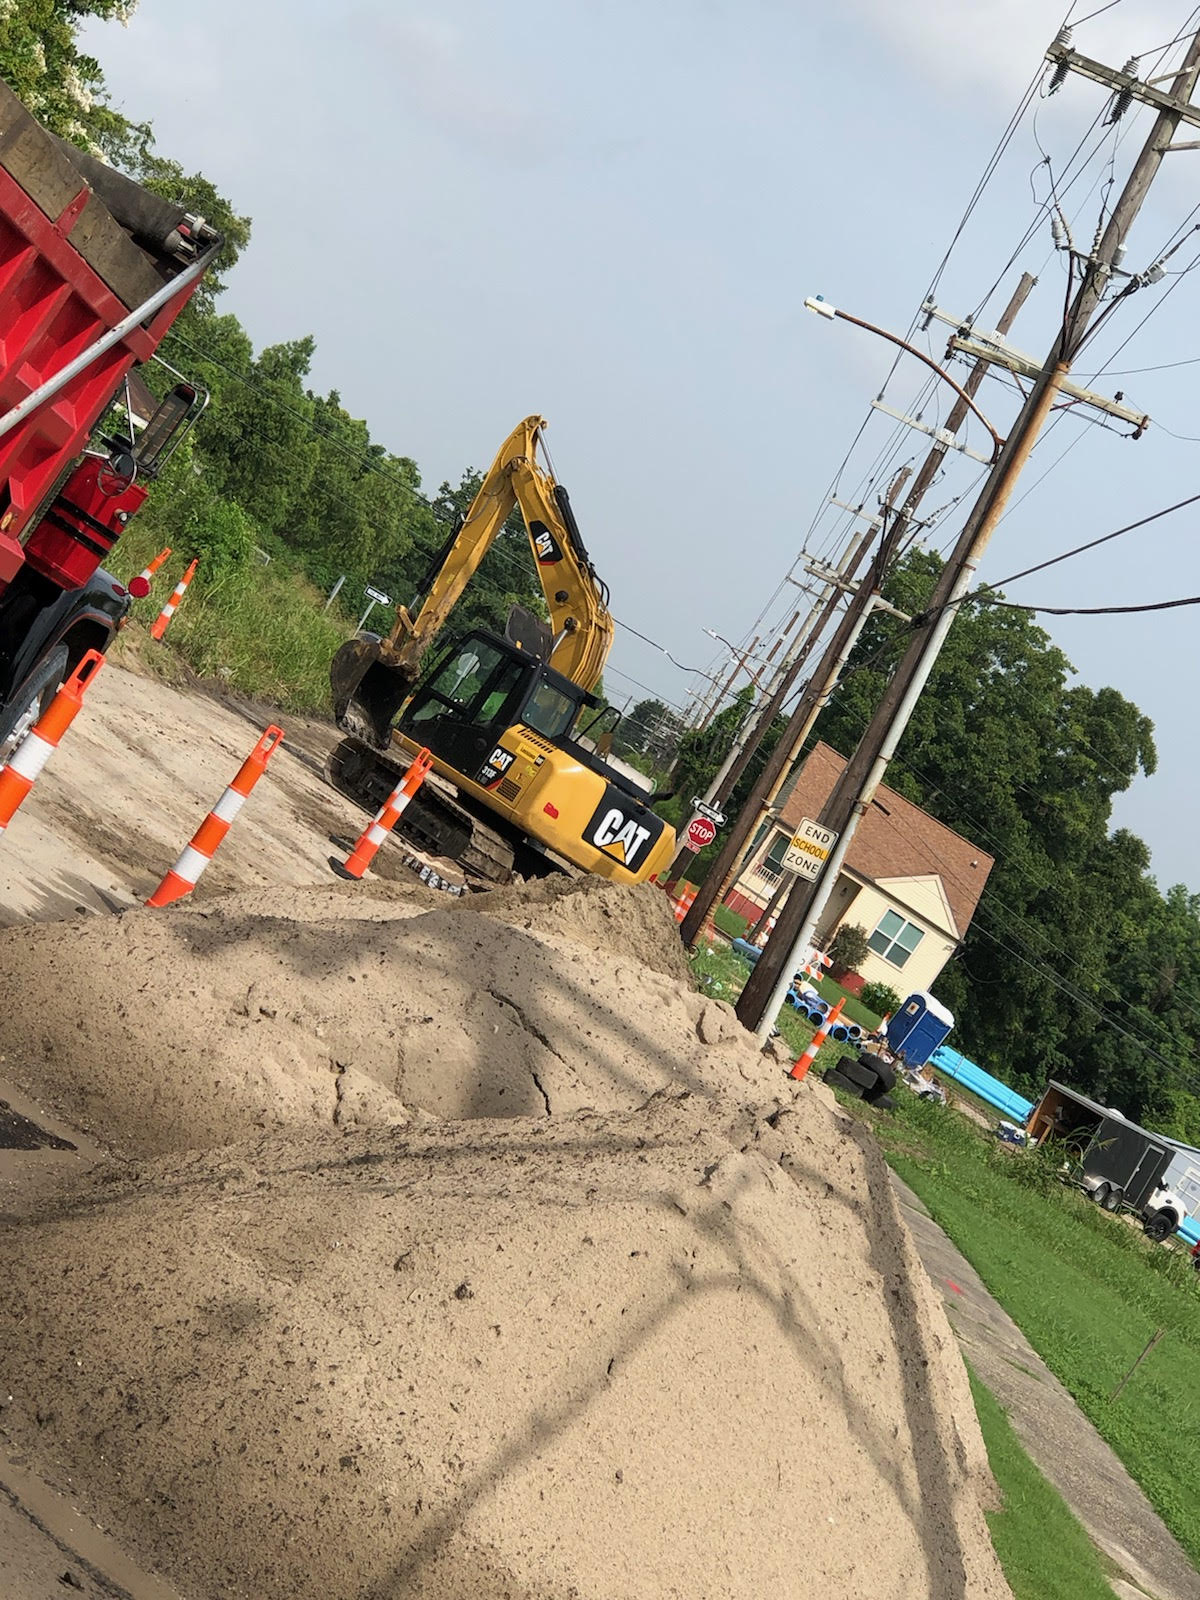 WATER LINE WORK UNDERWAY ON THE LOWER NINTH WARD NORTHEAST GROUP B PROJECT